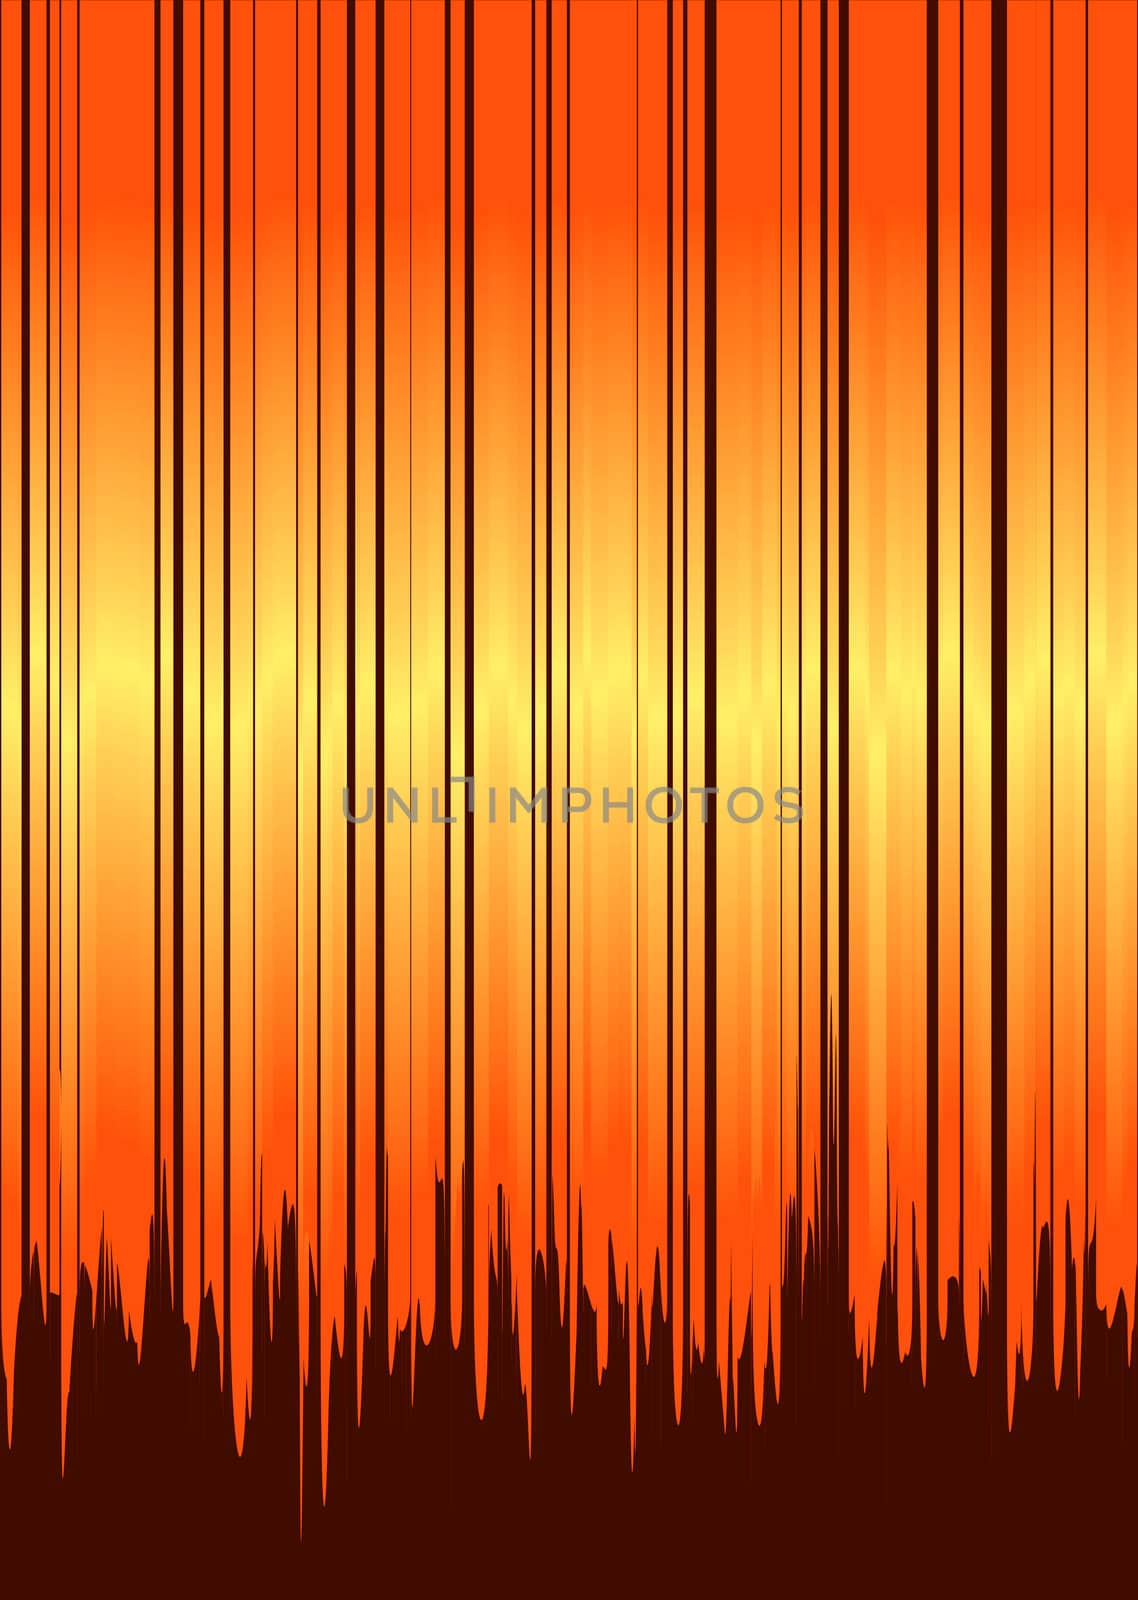 Abstract orange and brown background with vertical stripes
